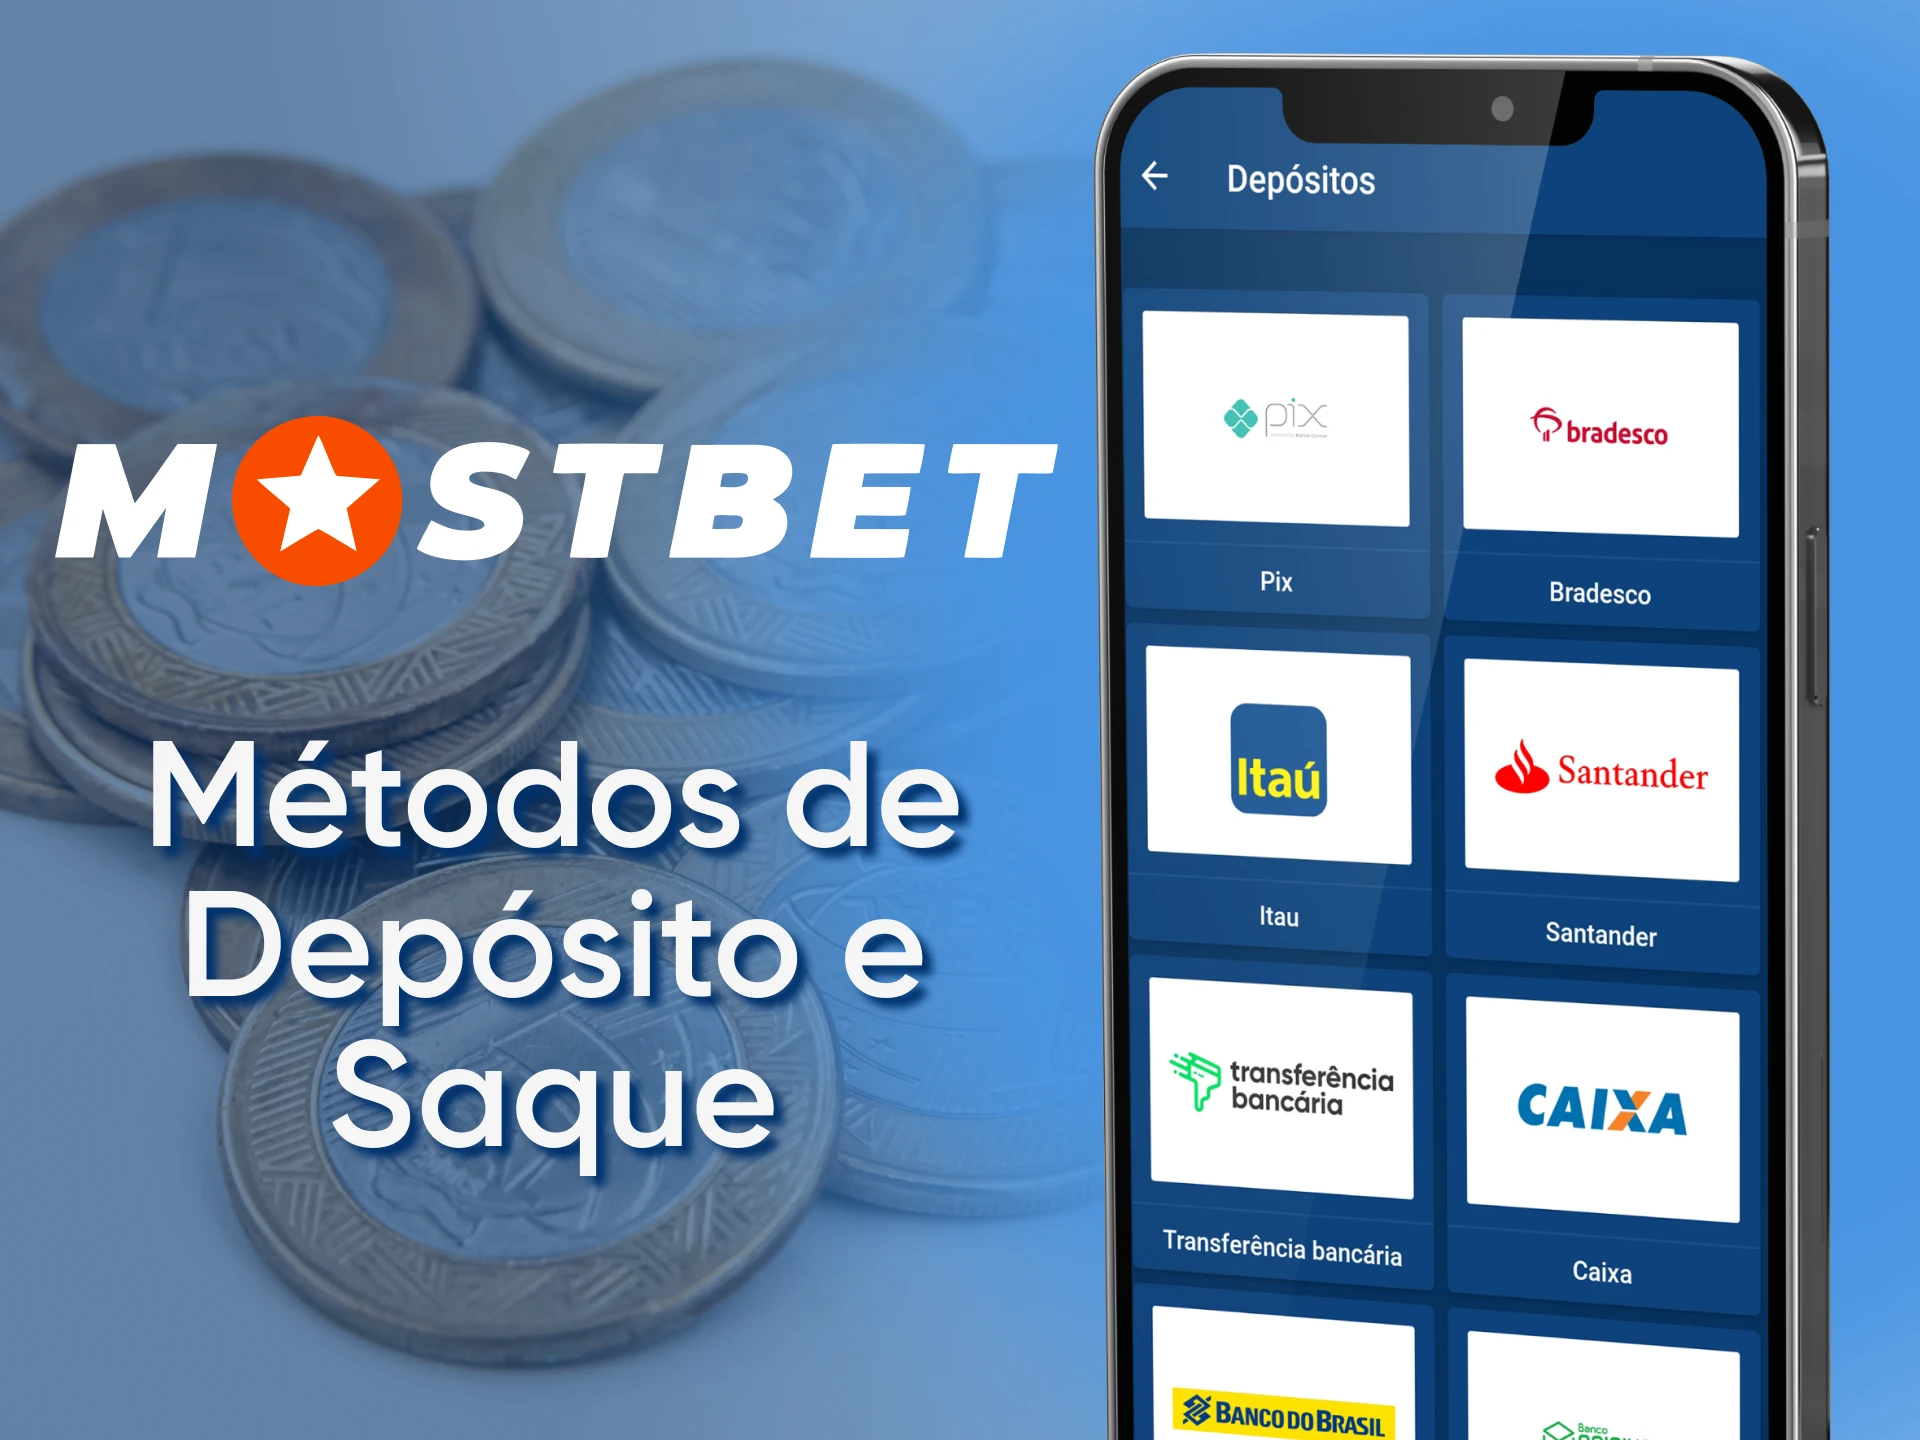 With this guide, discover how easy it is to make a deposit and withdraw your winnings at Mostbet.